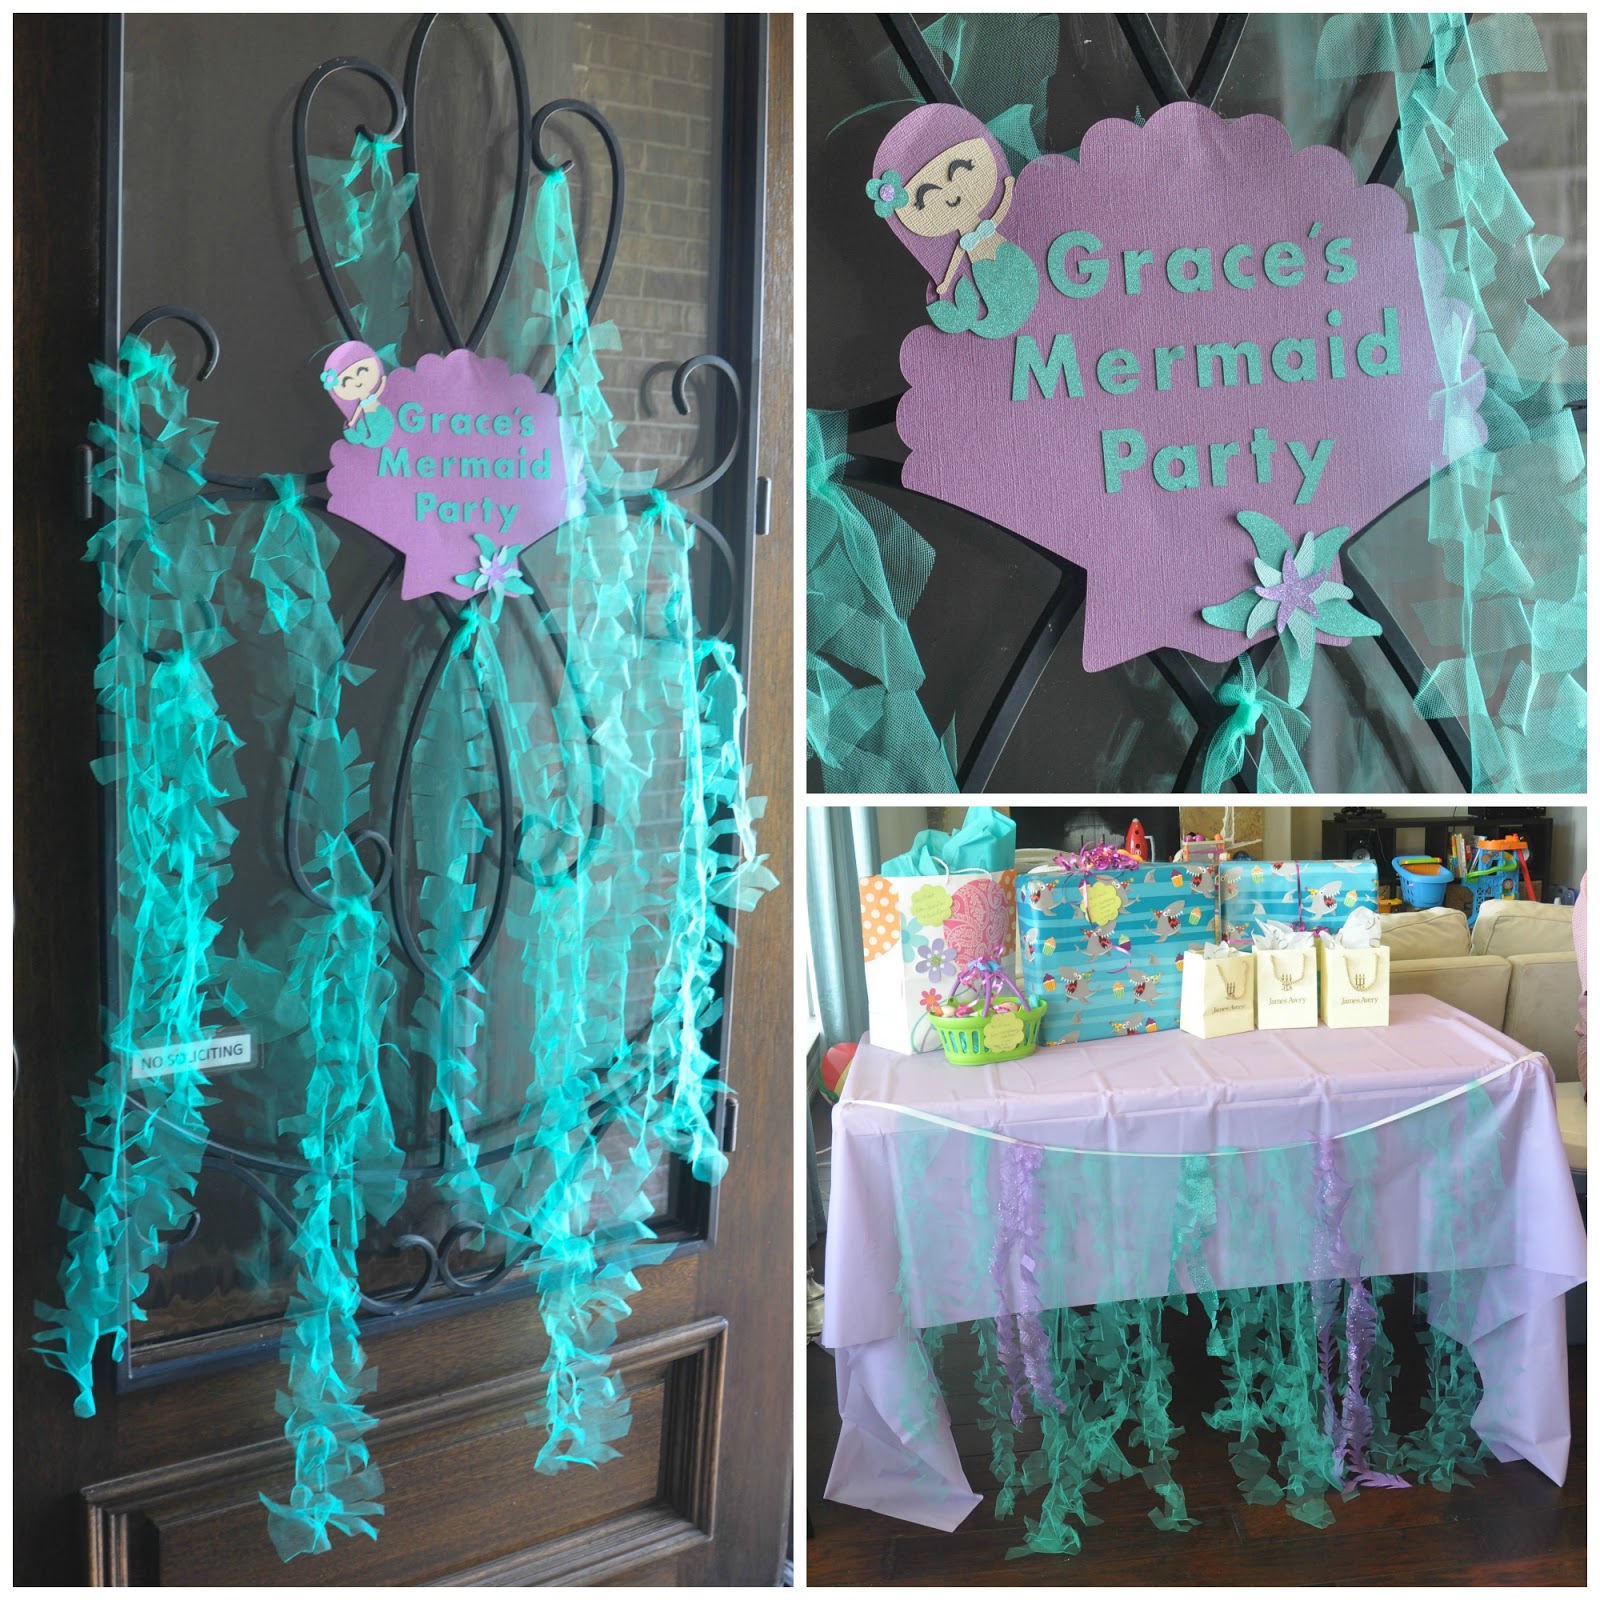 Sparkly Mermaid Seaweed  A DIY Party Decoration - TheseLittleLoves gifting